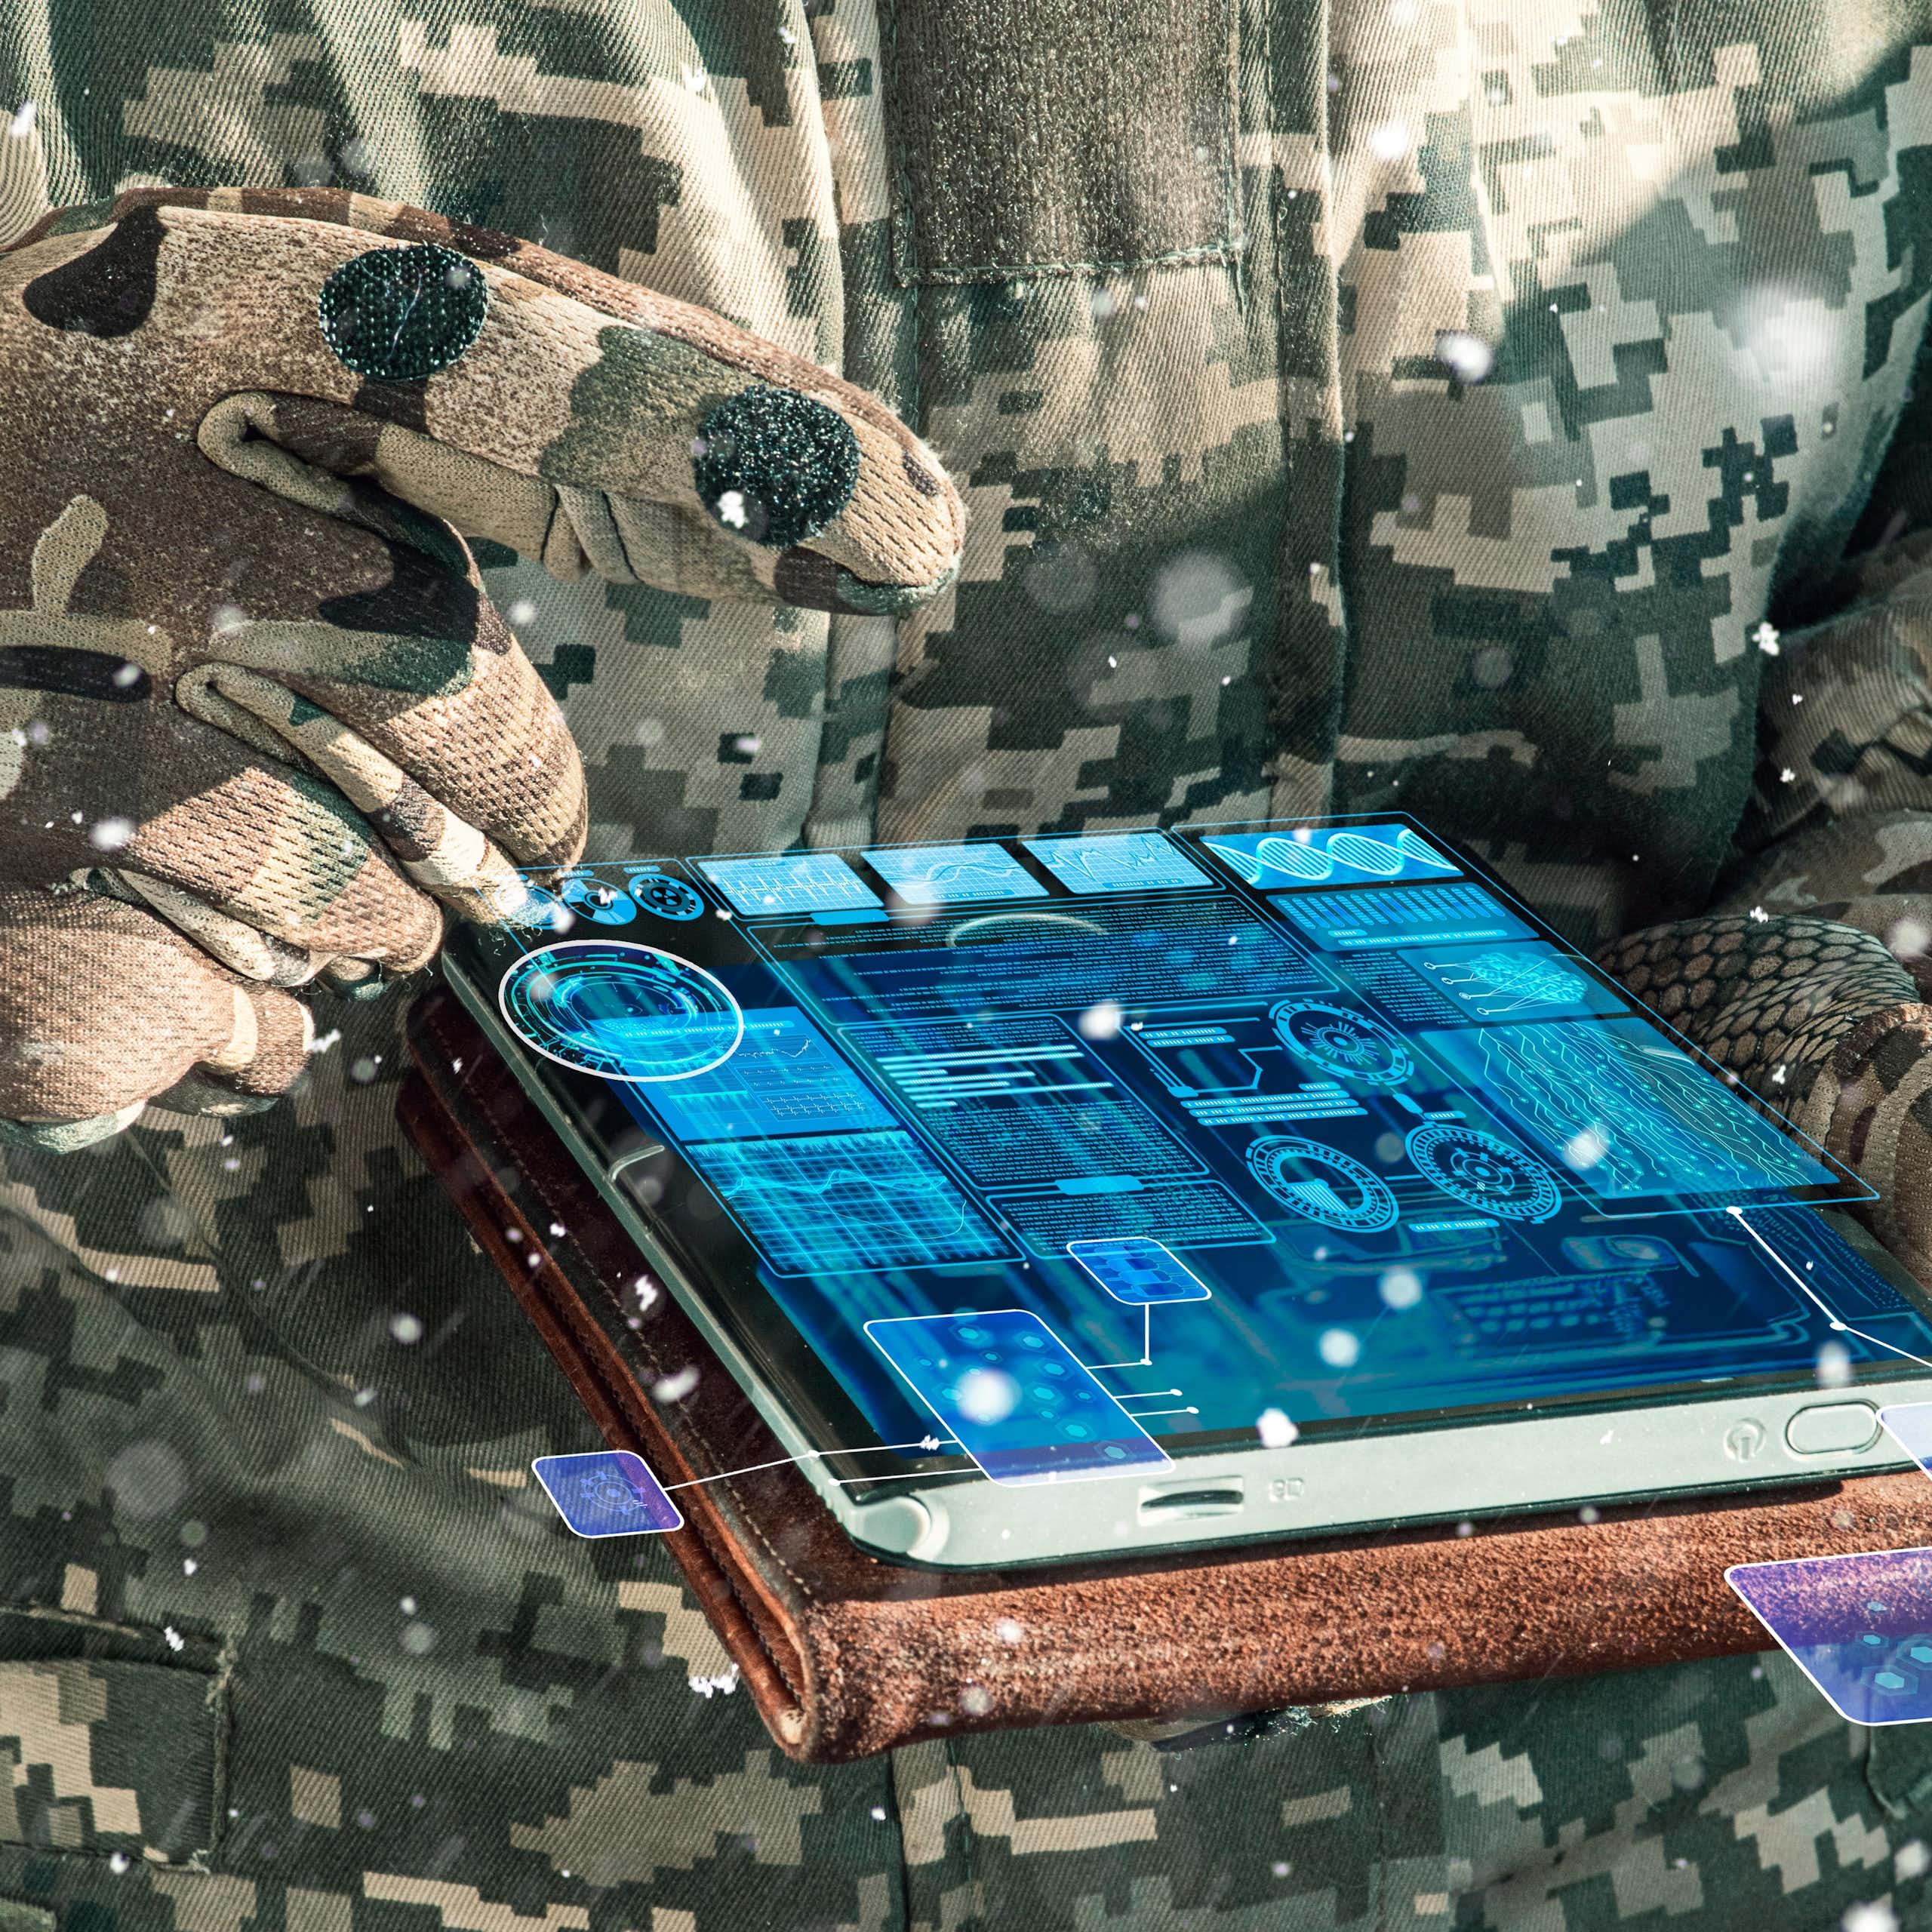 A staged photo of a military officer using AI